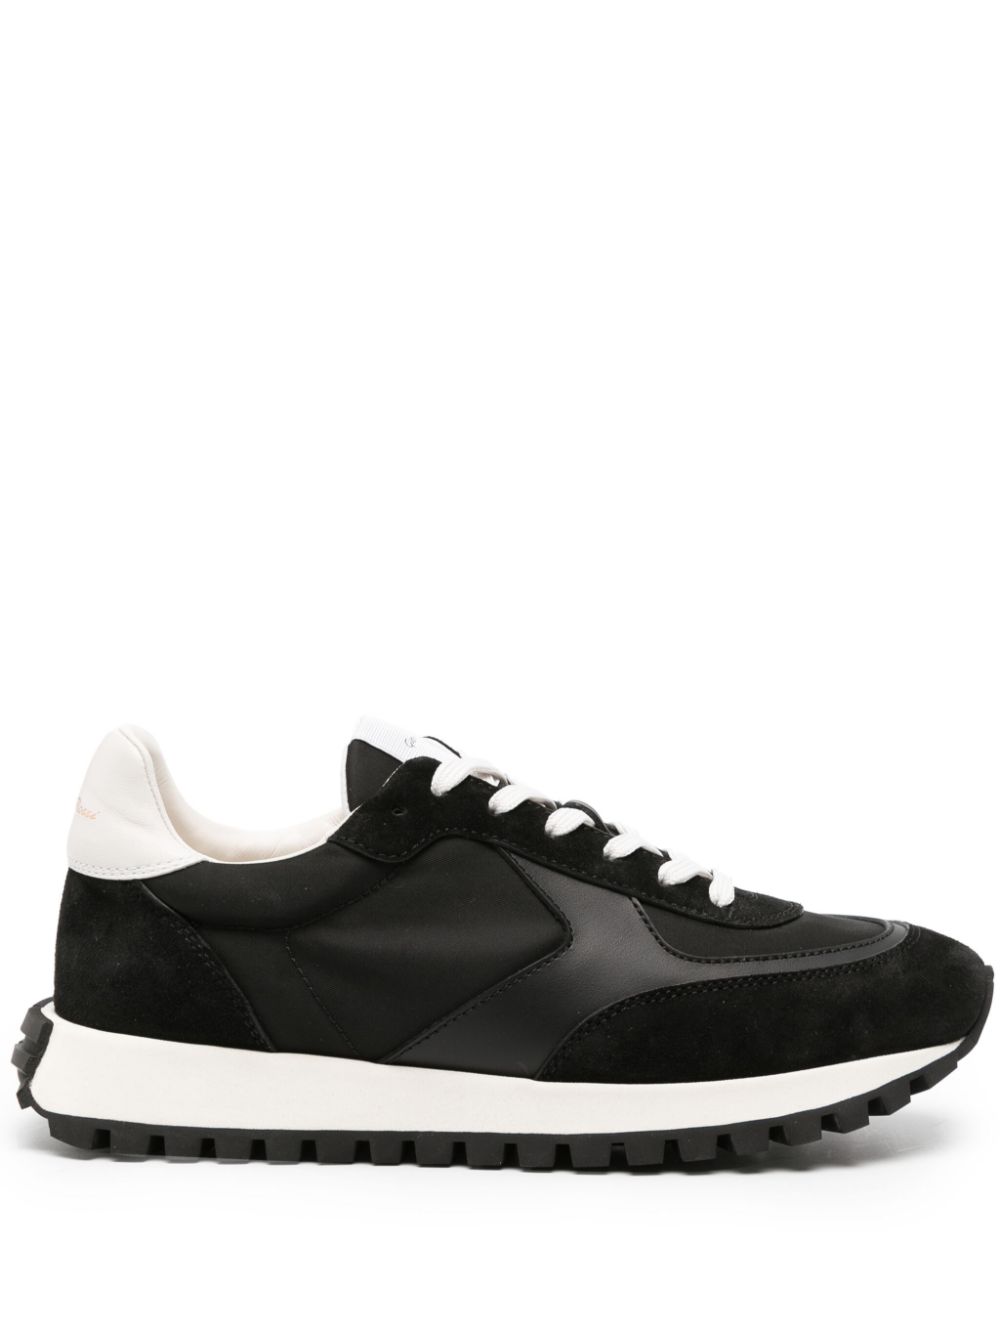 Gianvito Rossi Gravel Panelled Suede Trainers In Black